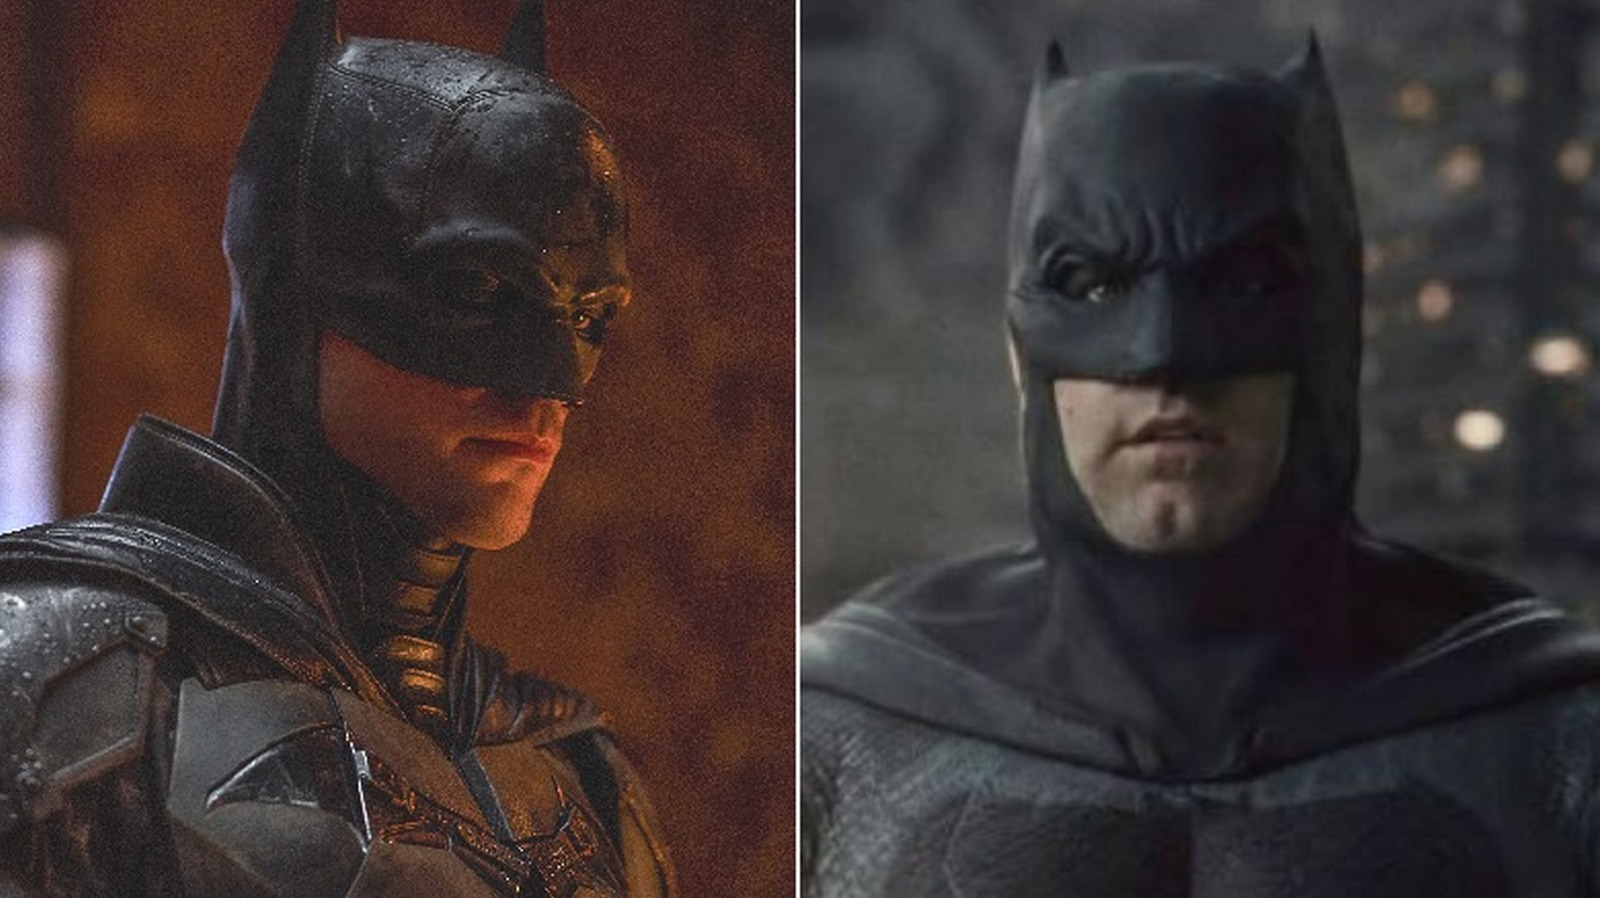 The Batman vs. Zack Snyder's Batman: How Are They Different? | Den of Geek